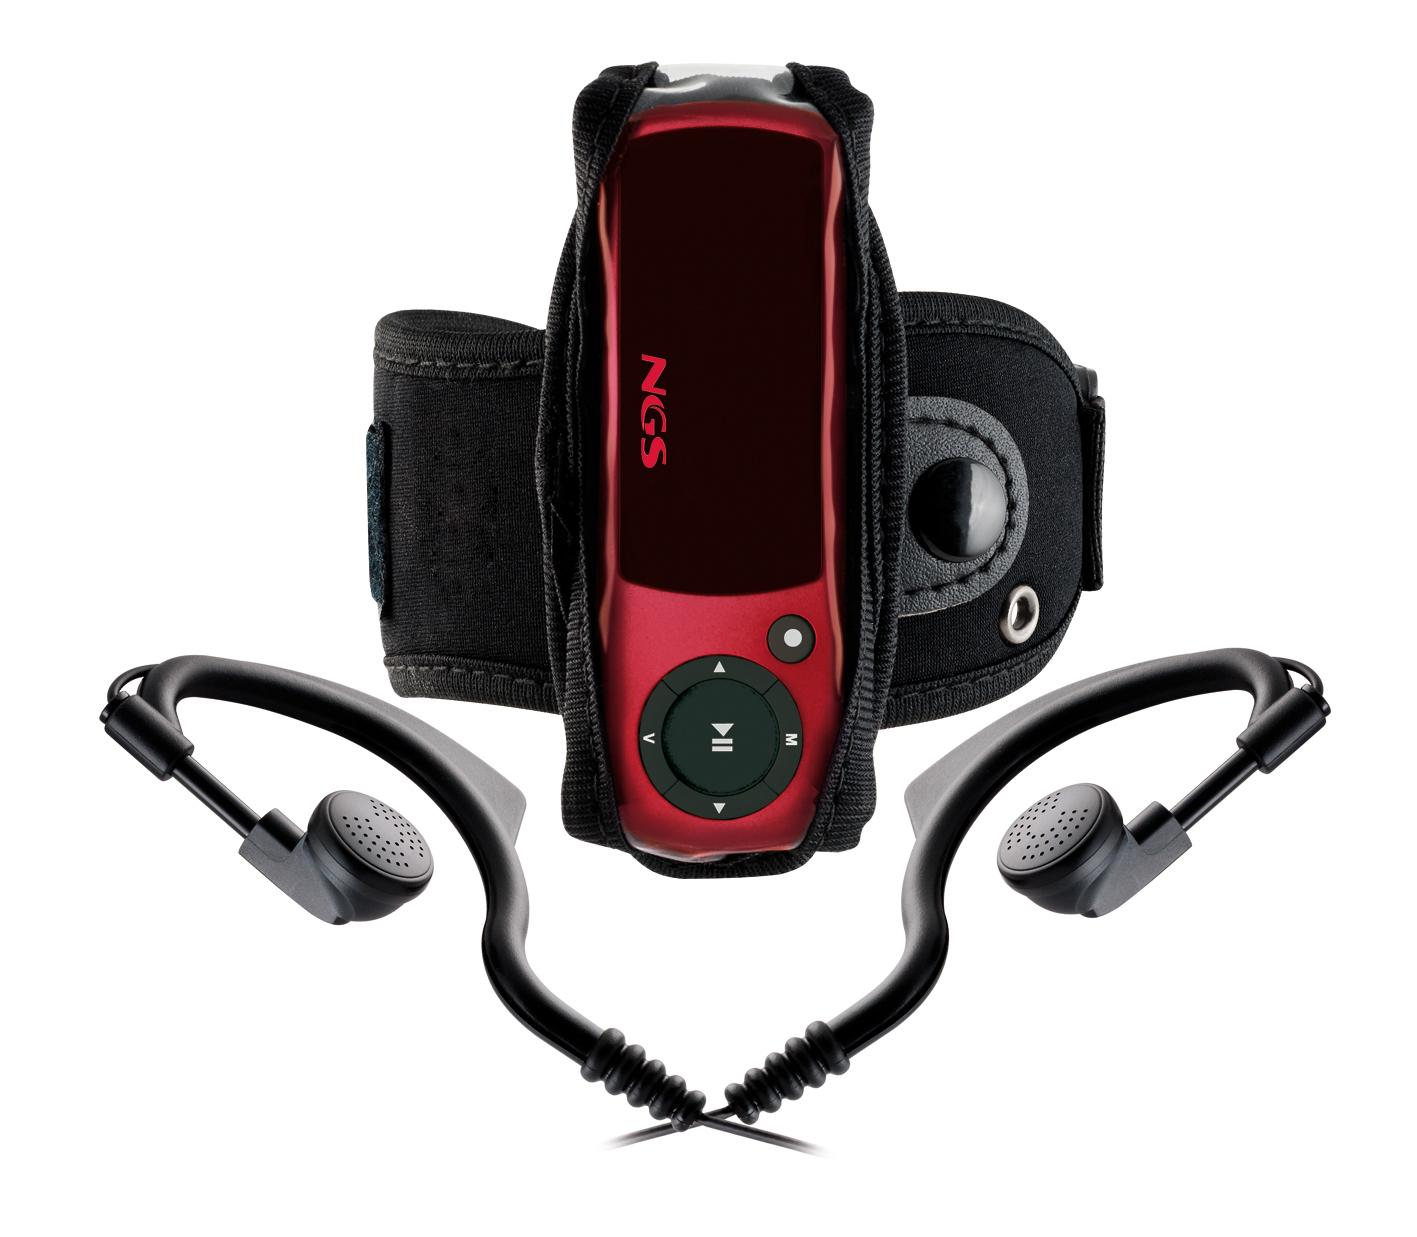 Foto Mp3/Mp4 Ngs ngs red popping mp3 4gb fm rojo [RED POPPING 4GB] [843600 foto 45789